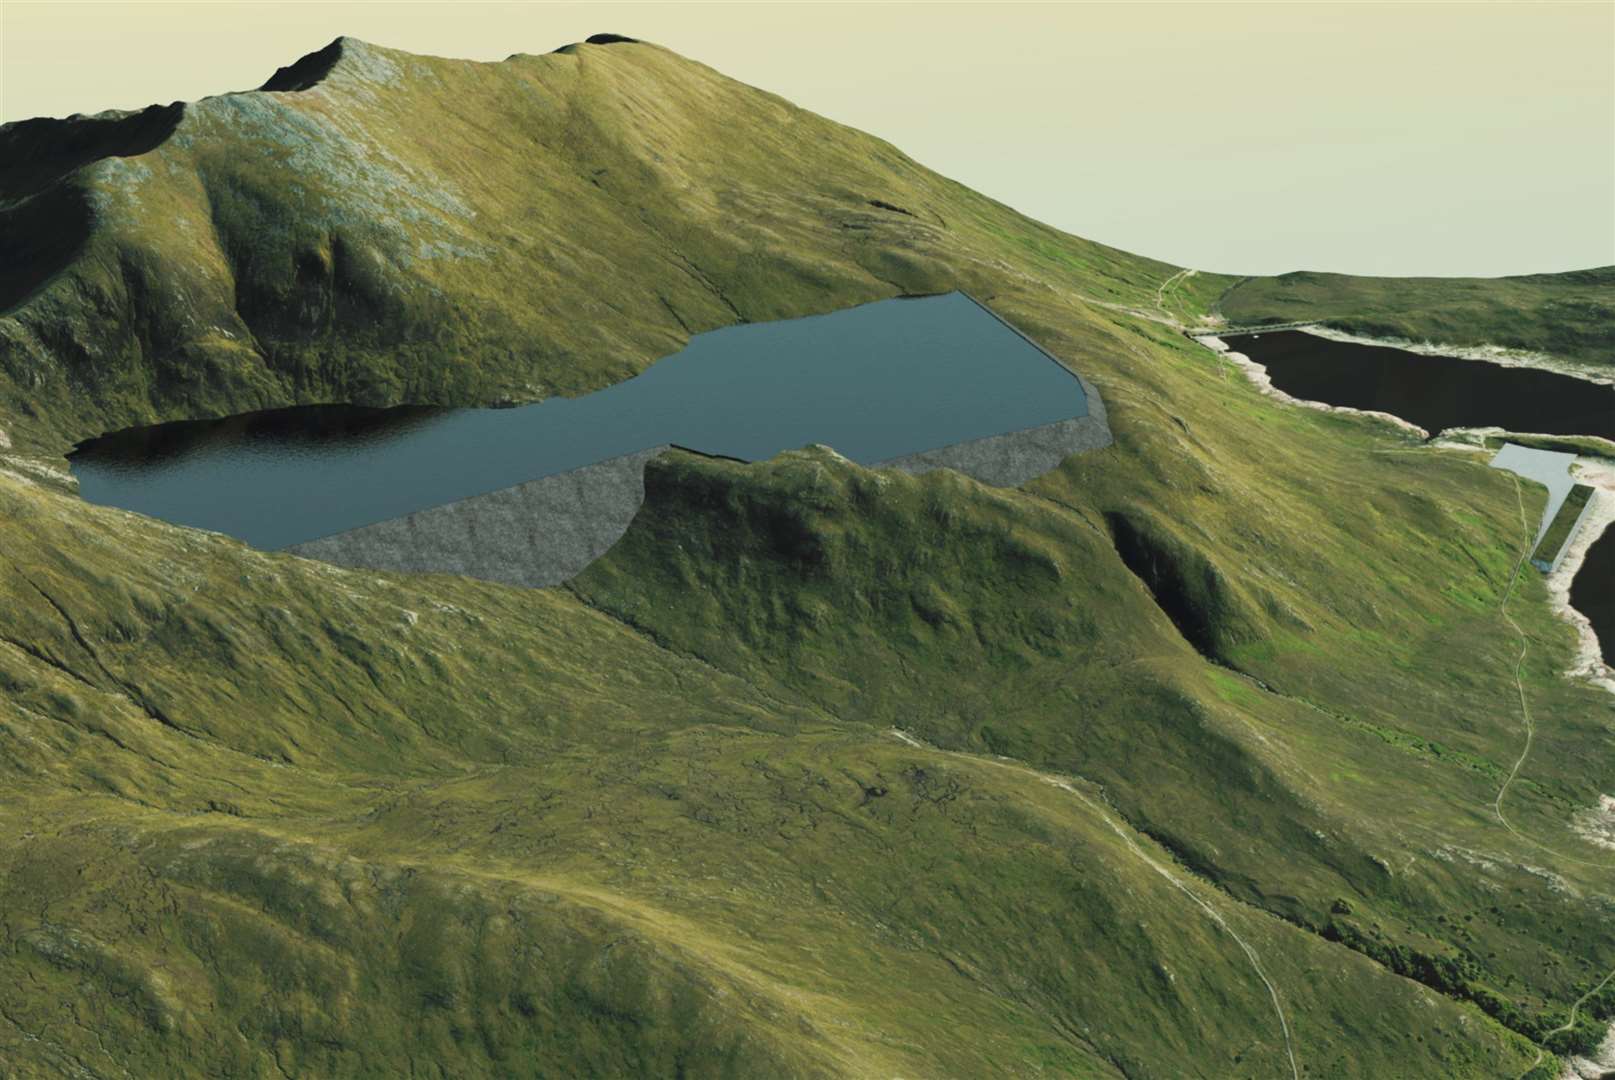 The proposed new dams and upper reservoir on the left, with the existing Loch Quoich on the right and the Quoich dam in the distance.